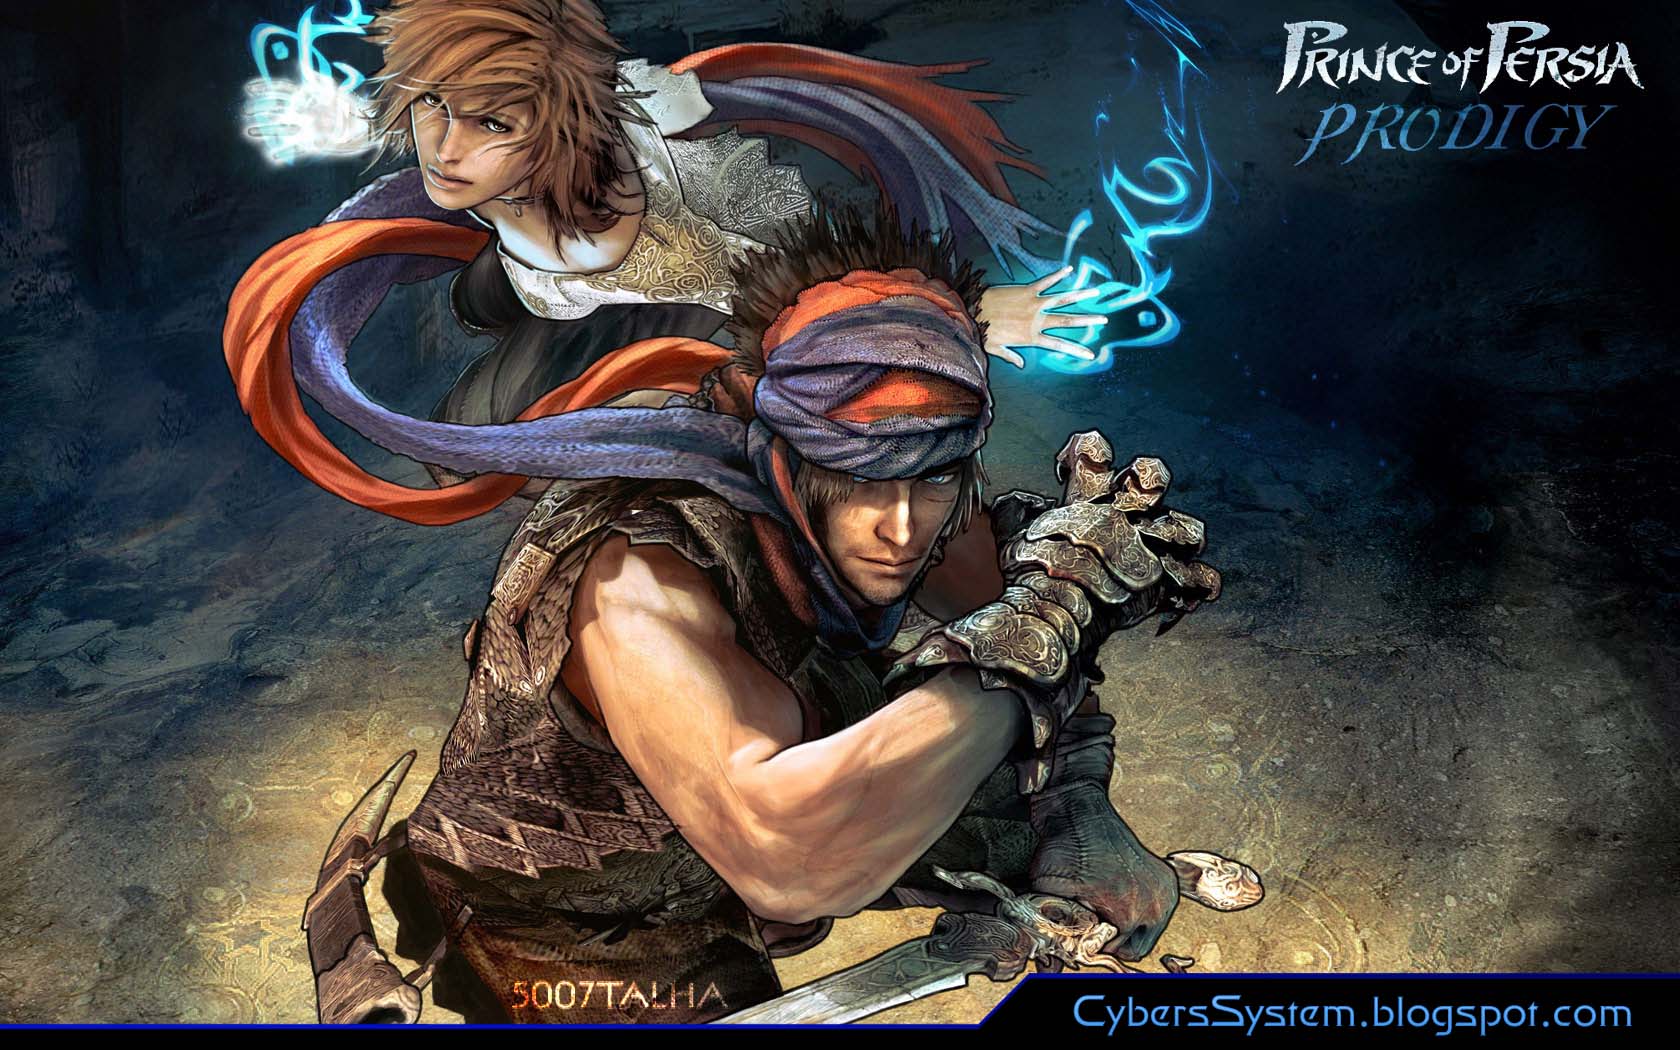 Prince of persia wallpapers